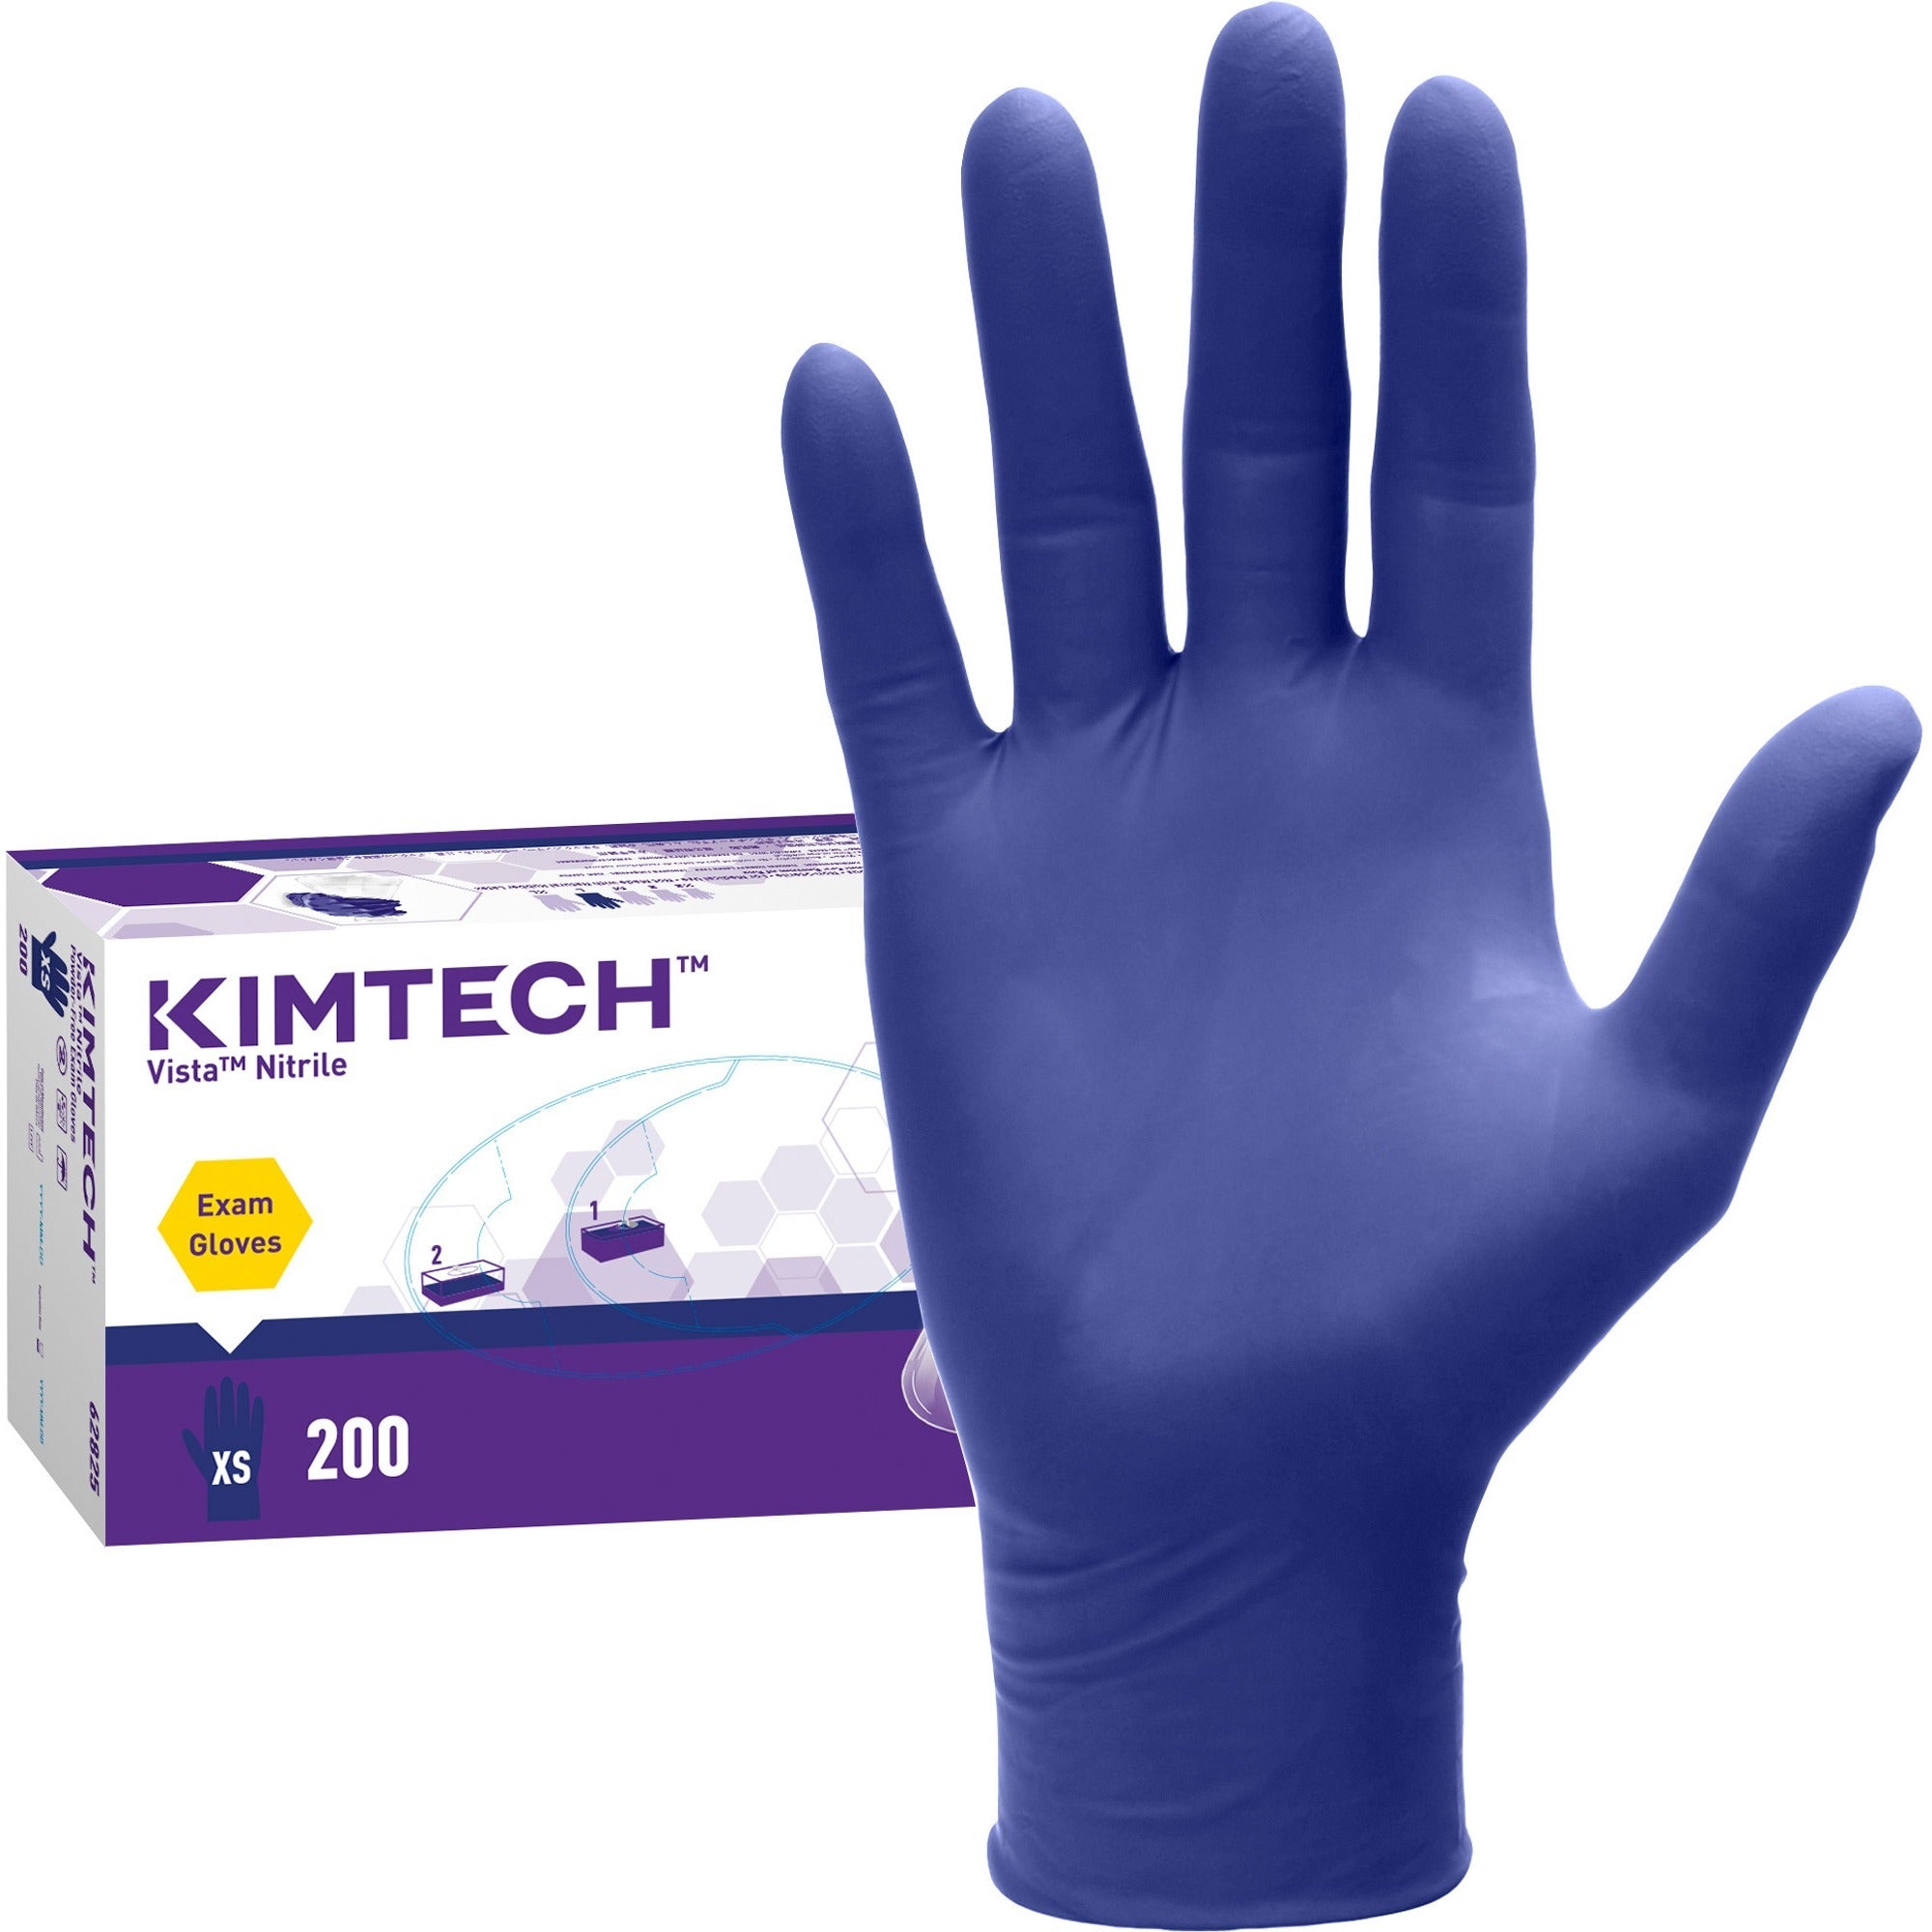 kimtech-vista-nitrile-exam-gloves-x-small-size-for-right-left-hand-nitrile-blue-recyclable-textured-fingertip-powdered-non-sterile-for-laboratory-application-200-box-47-mil-thickness-950-glove-length_kcc62825 - 1